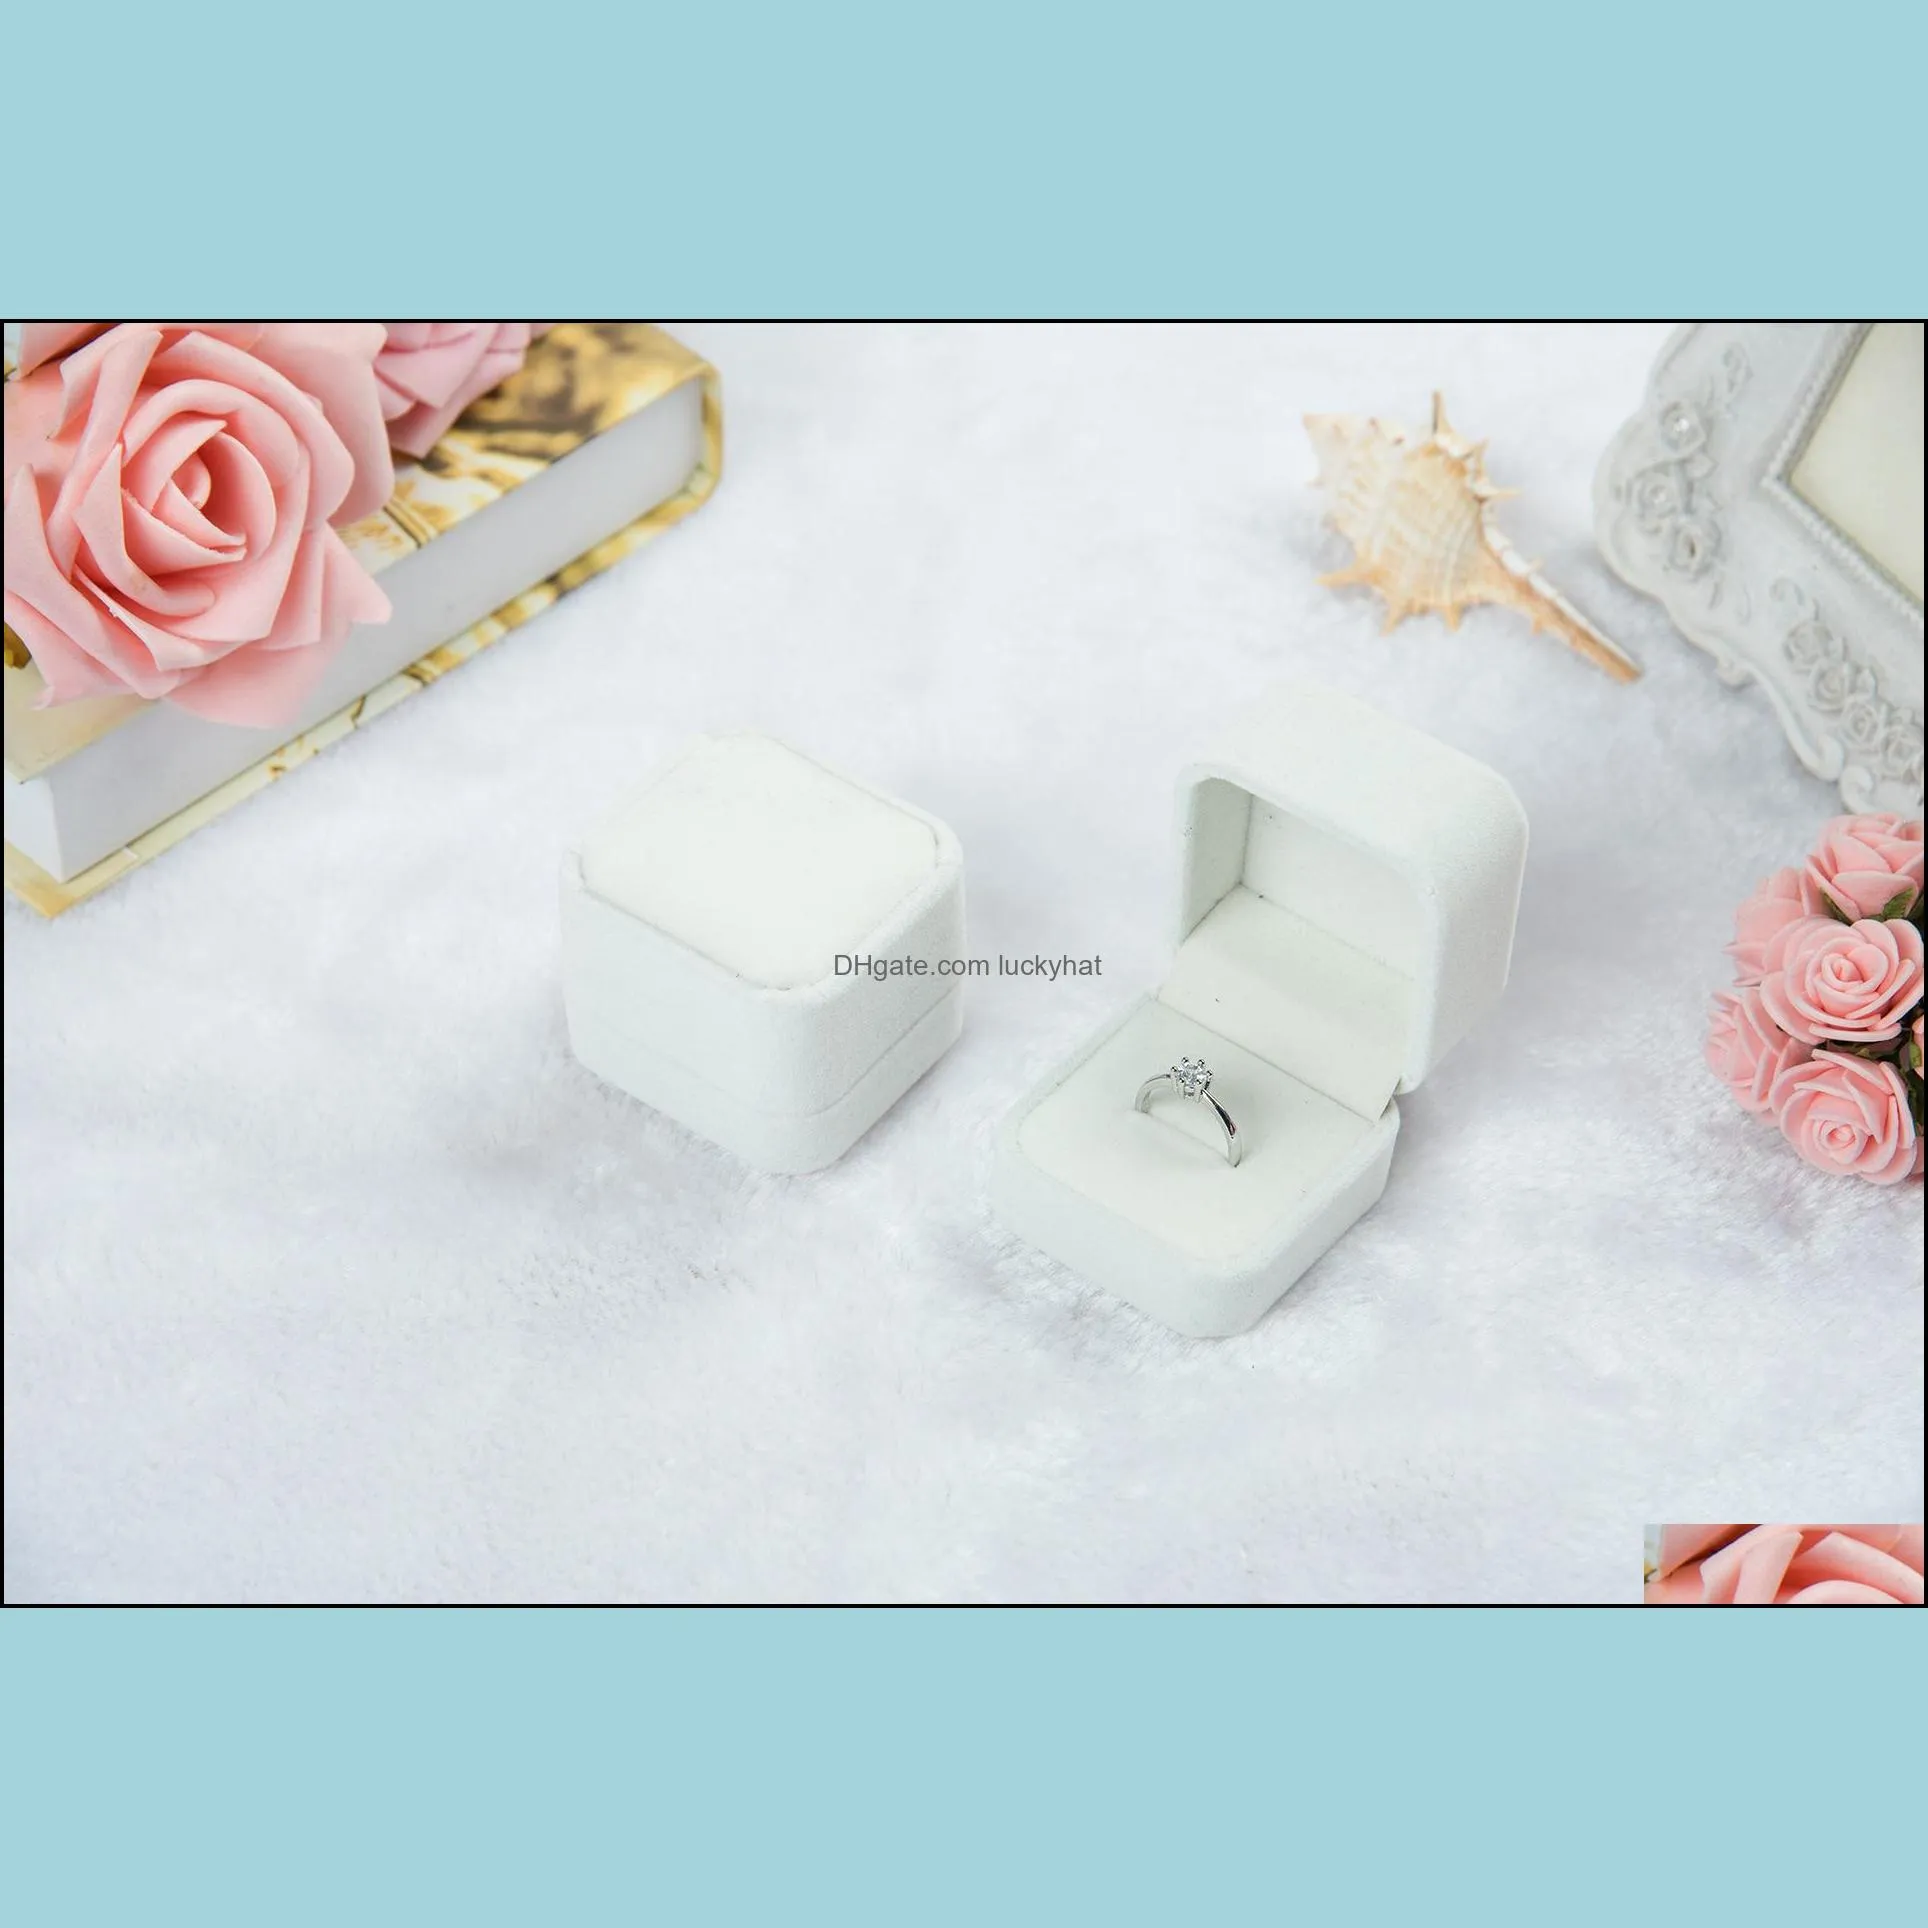 fashion jewelry gift boxes packaging 10 colors square shape velvet wedding engagement couple rings classic luxury show case box